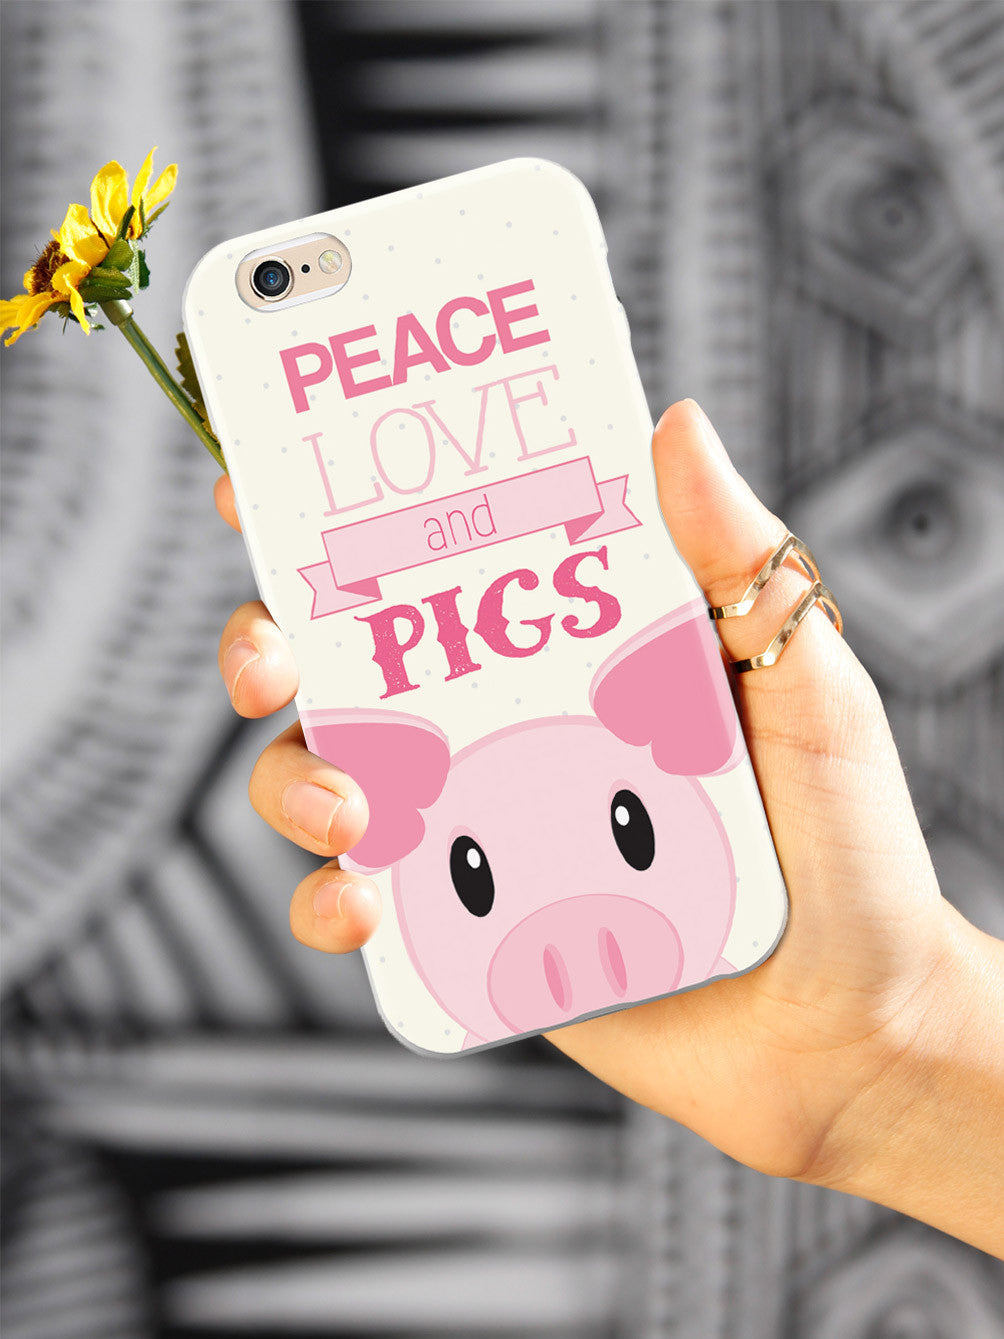 Peace Love and Pigs Case